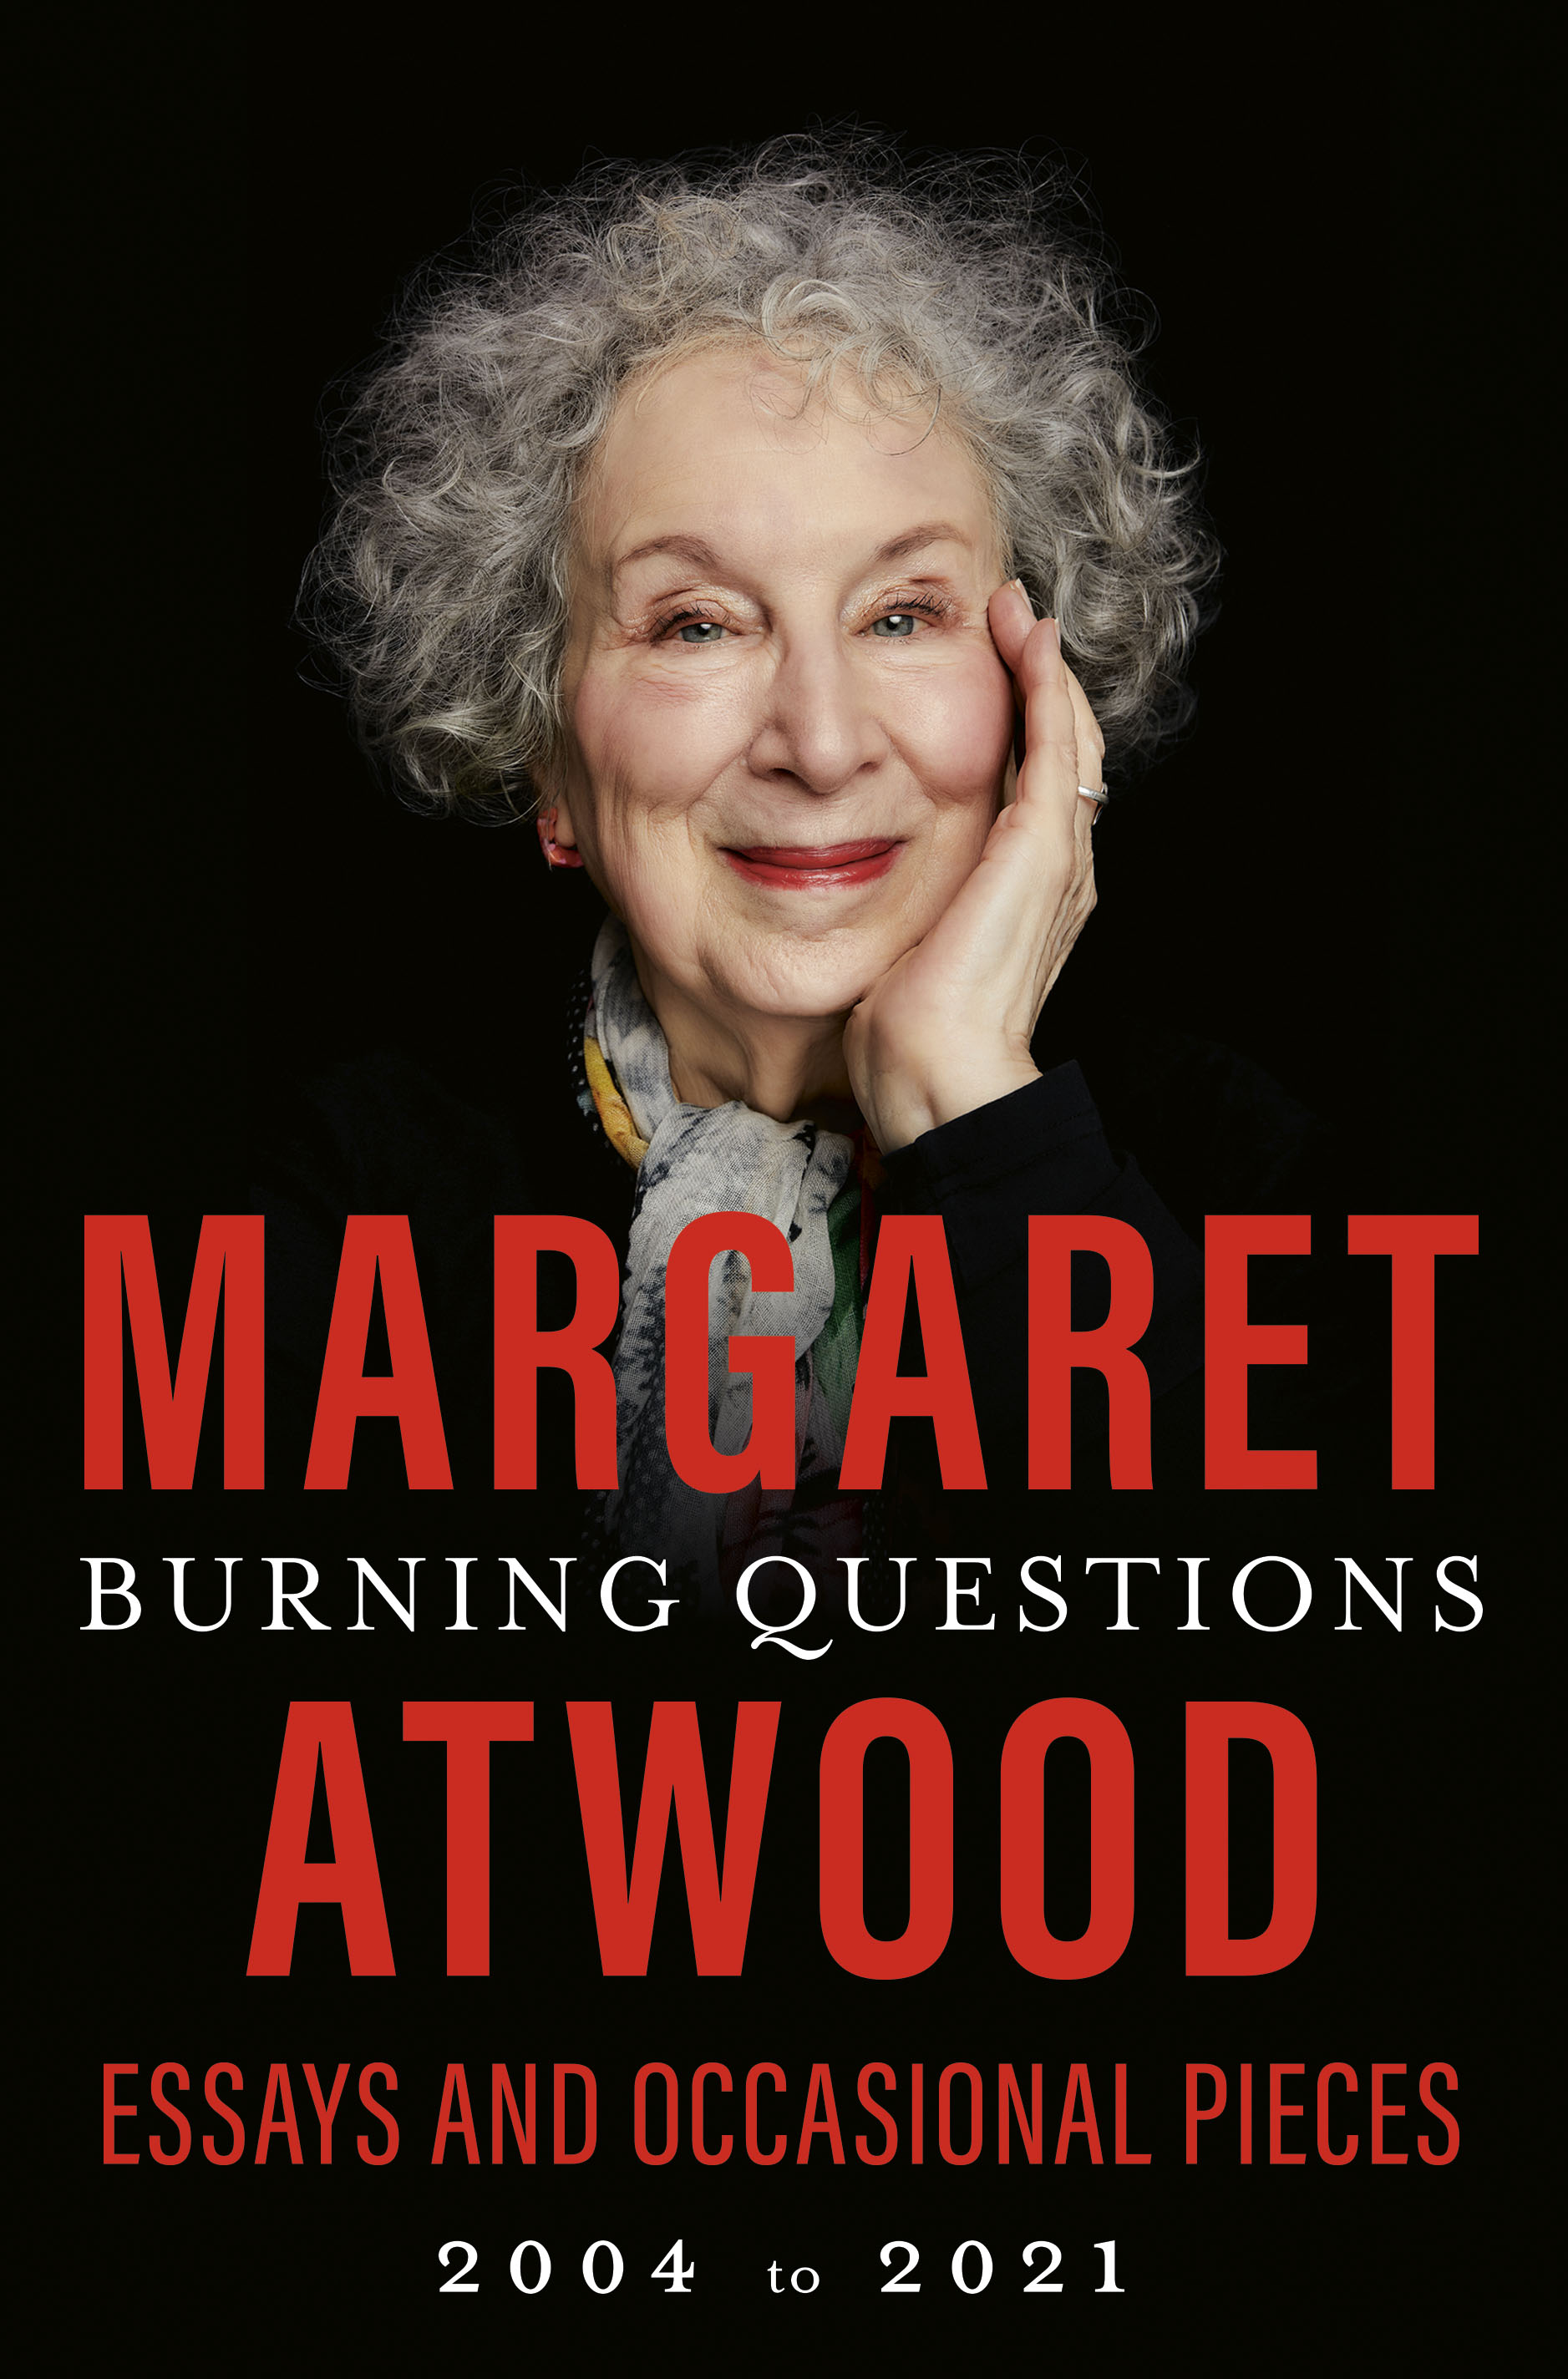 Virtual event with Margaret Atwood/Burning Questions